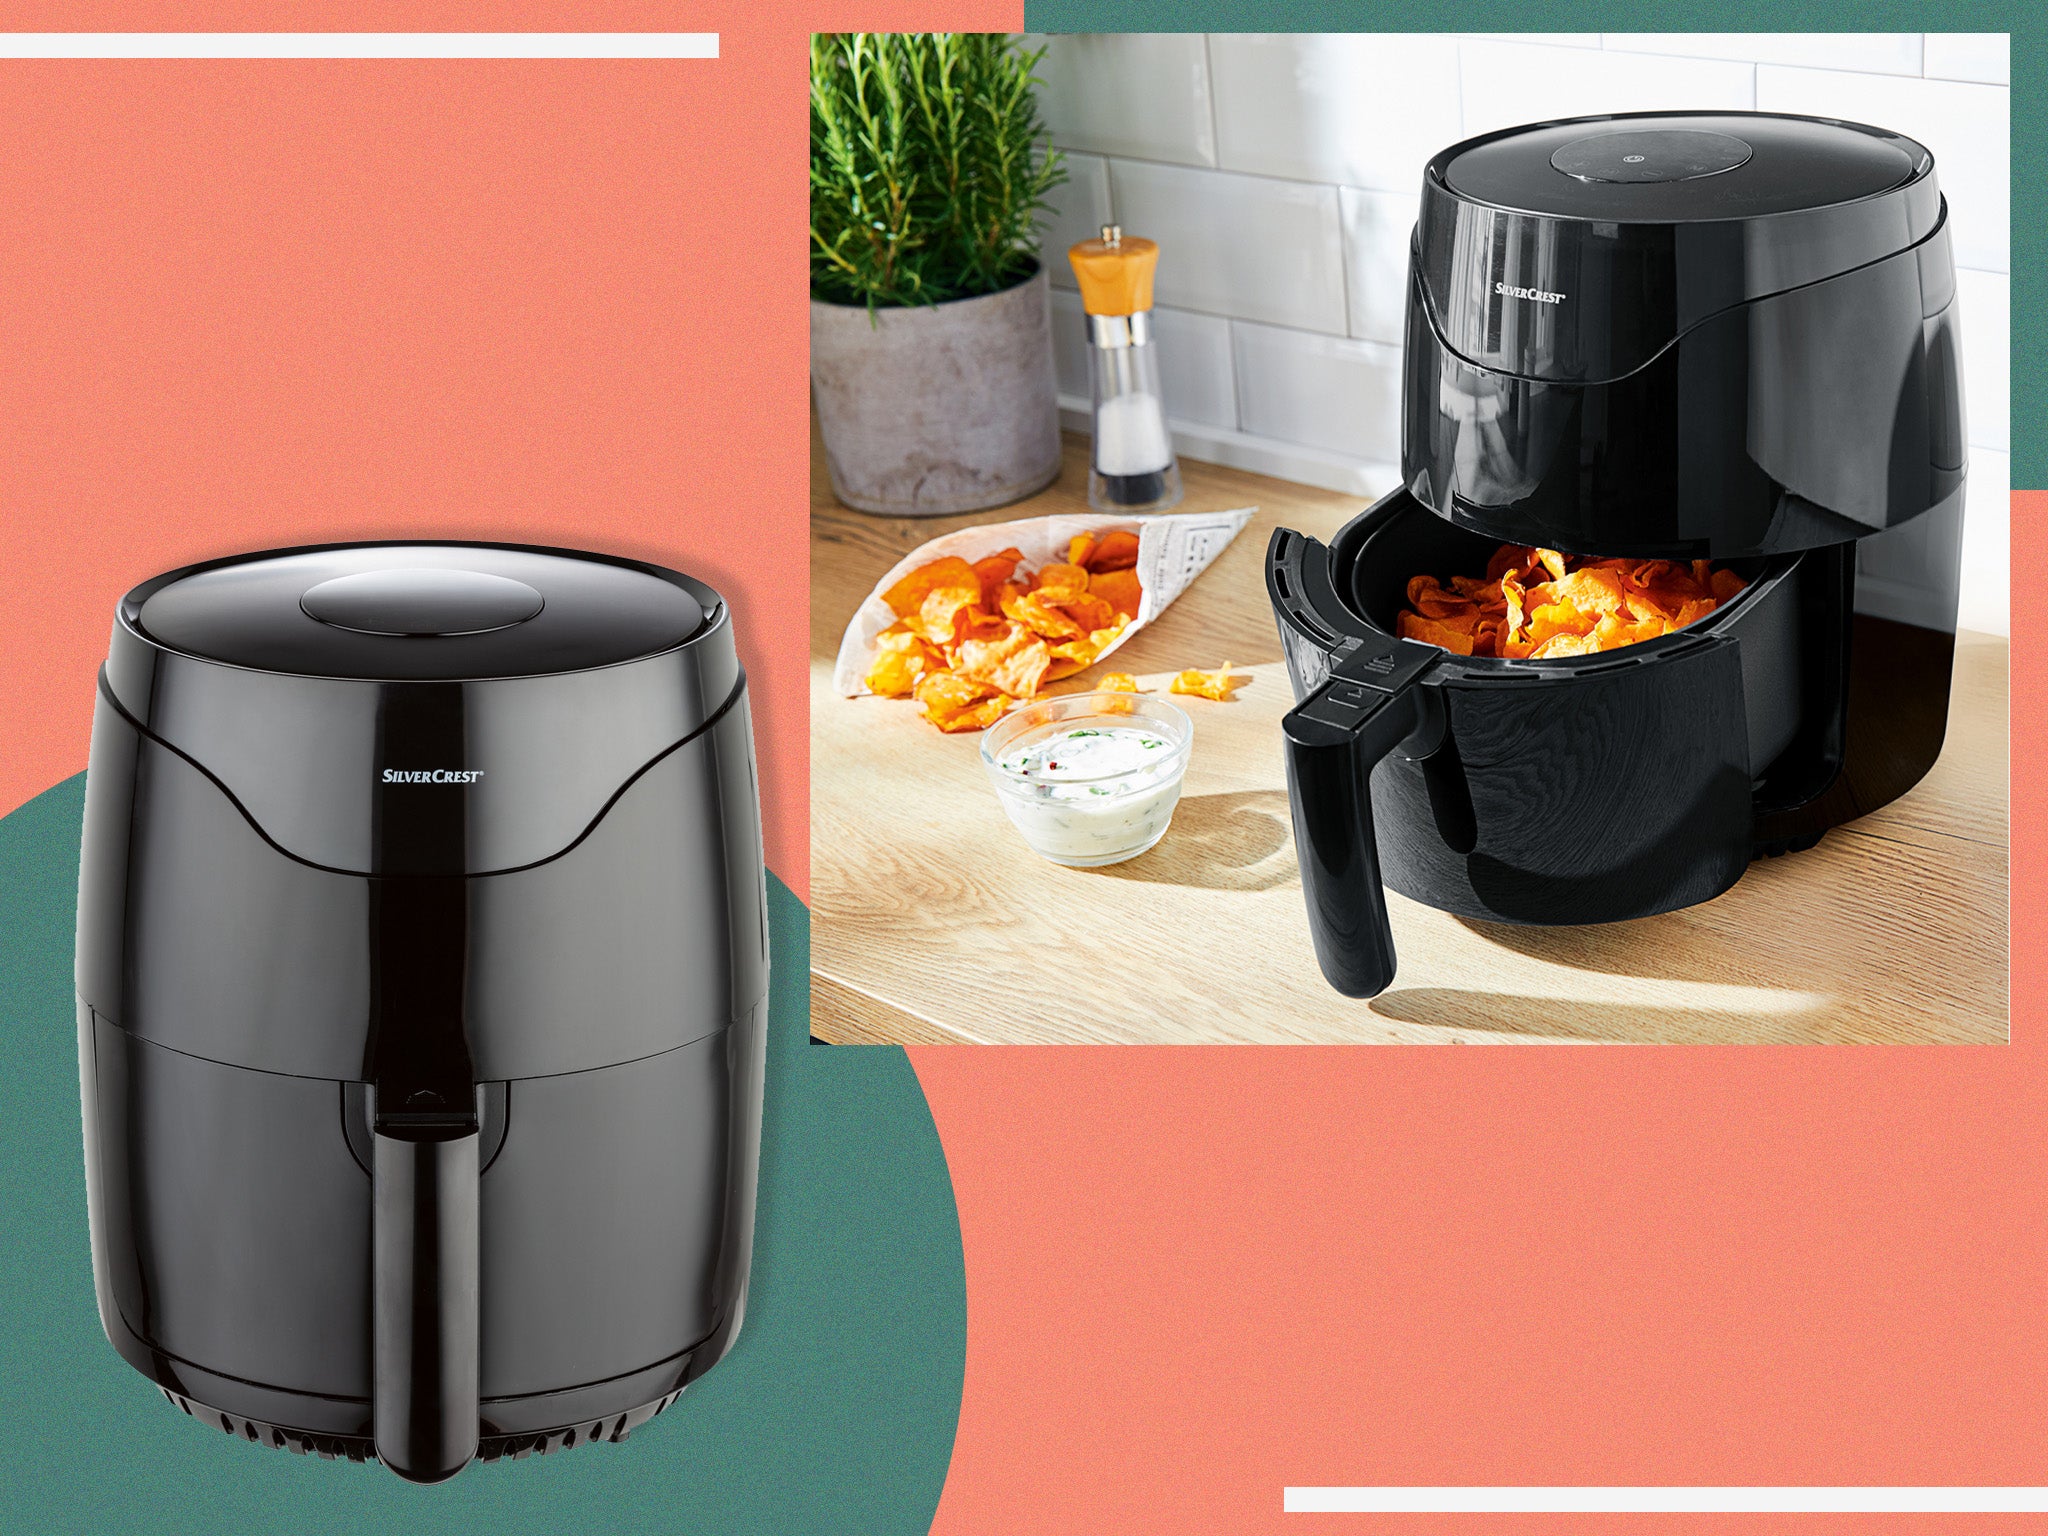 It’s one of the cheapest air fryers on the market